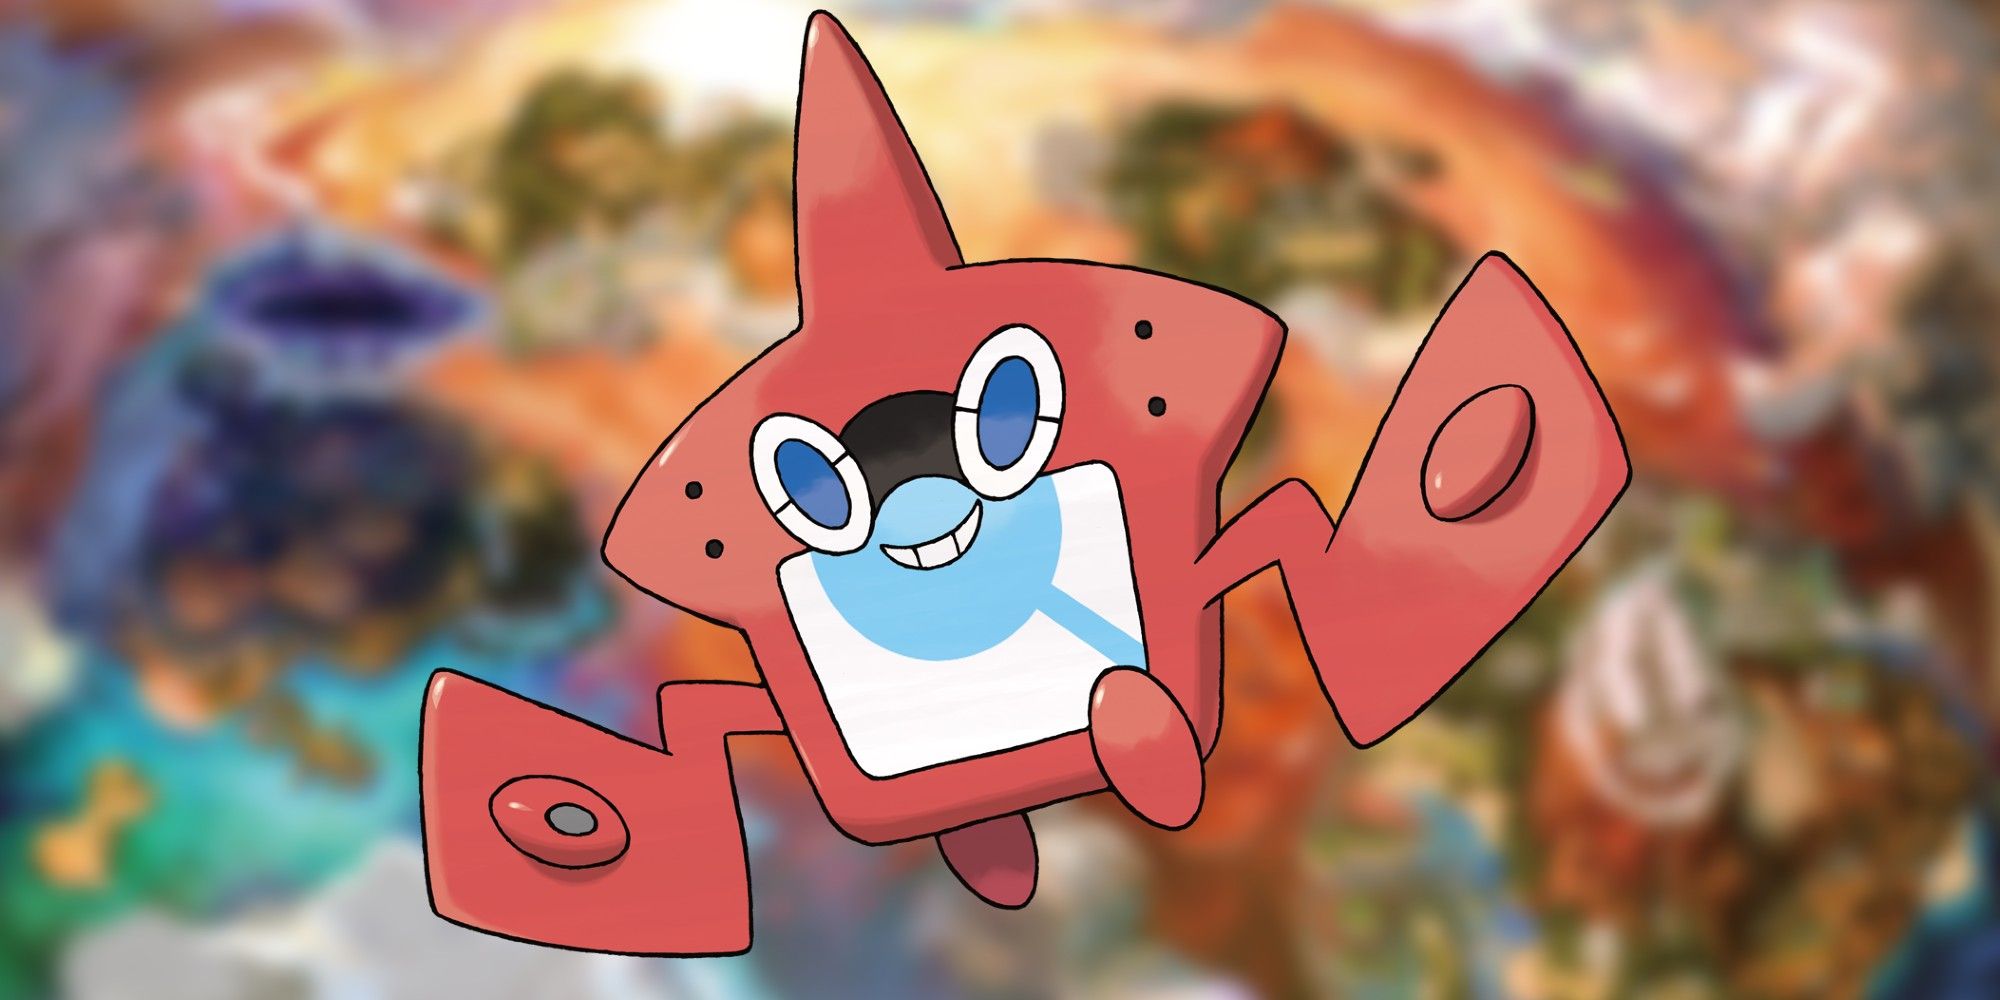 A Rotom Pokedex hovers in front of a blurred map of Alola.  He has a friendly smile on his face.